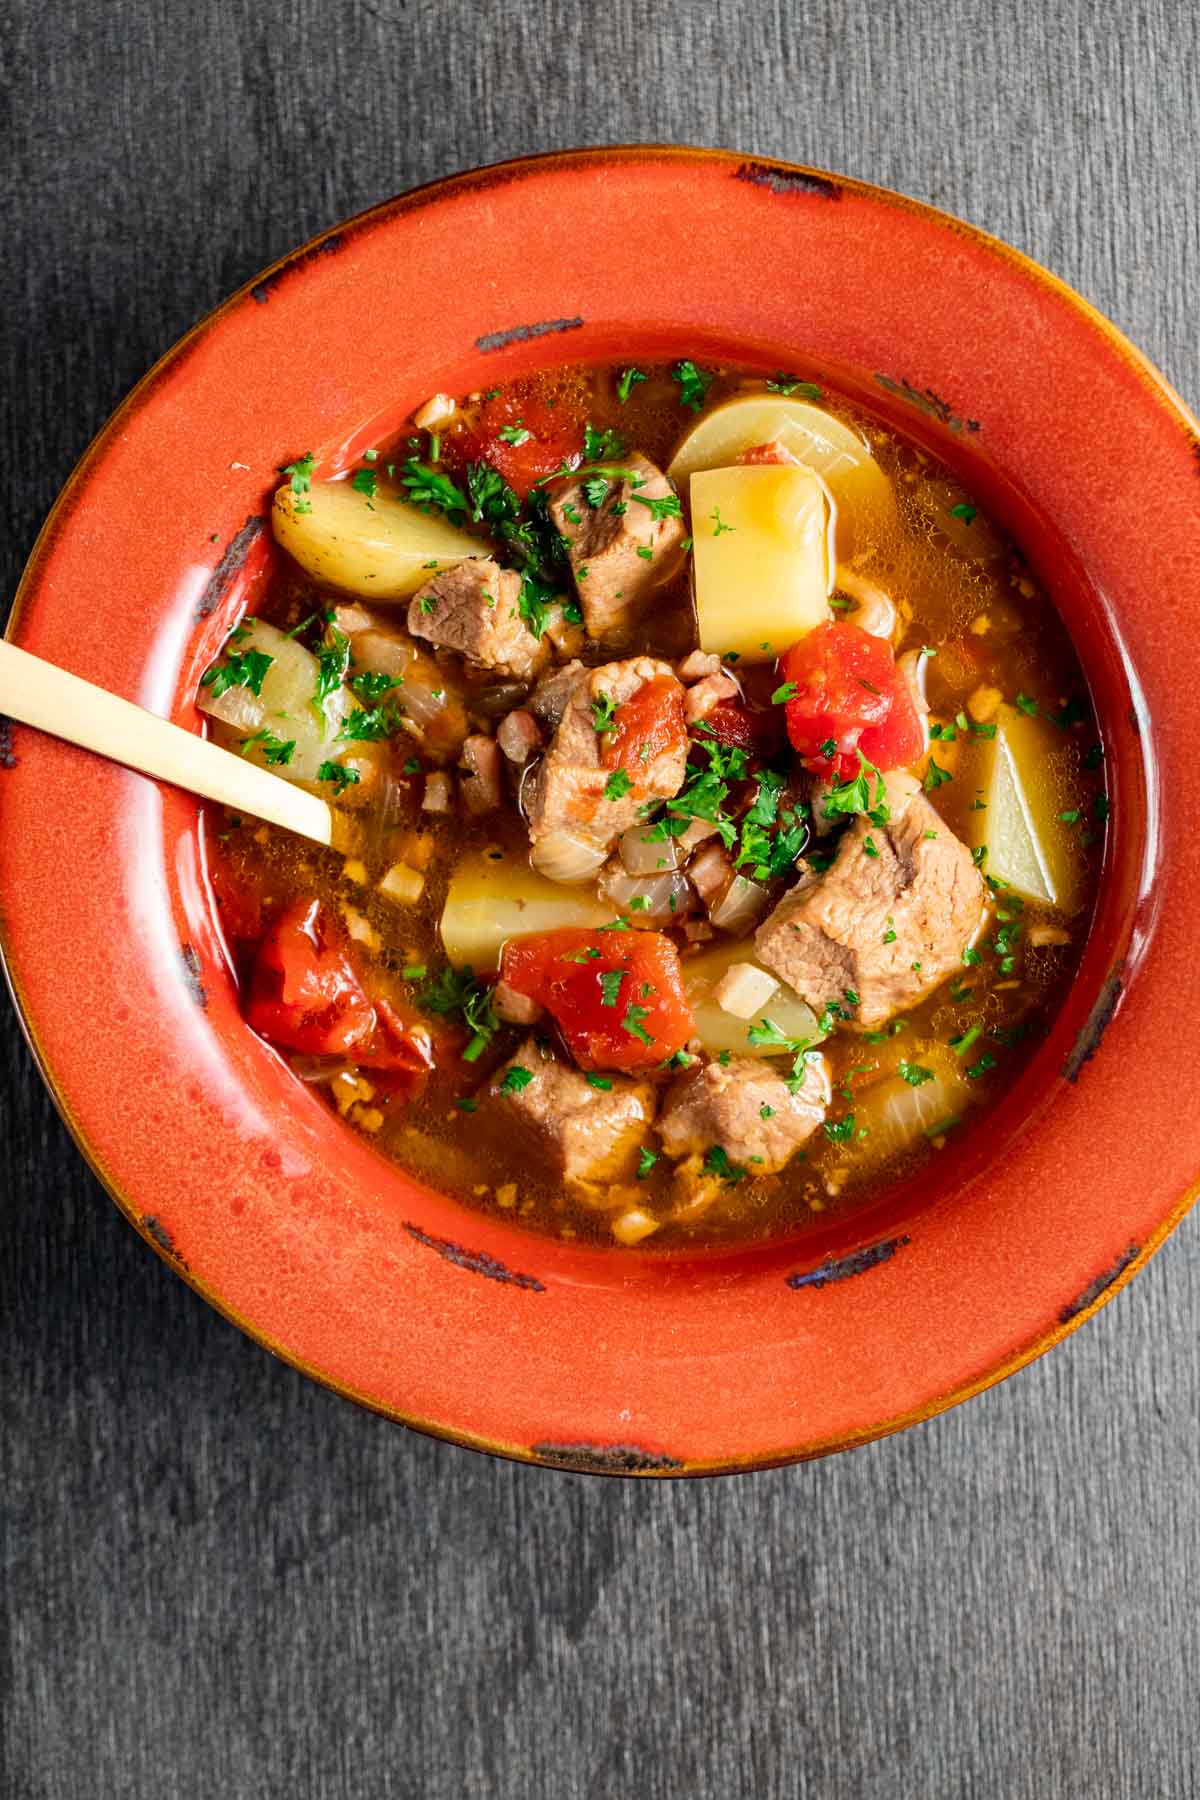 Overhead view of veal stew in a bowl with a spoon inserted into it.